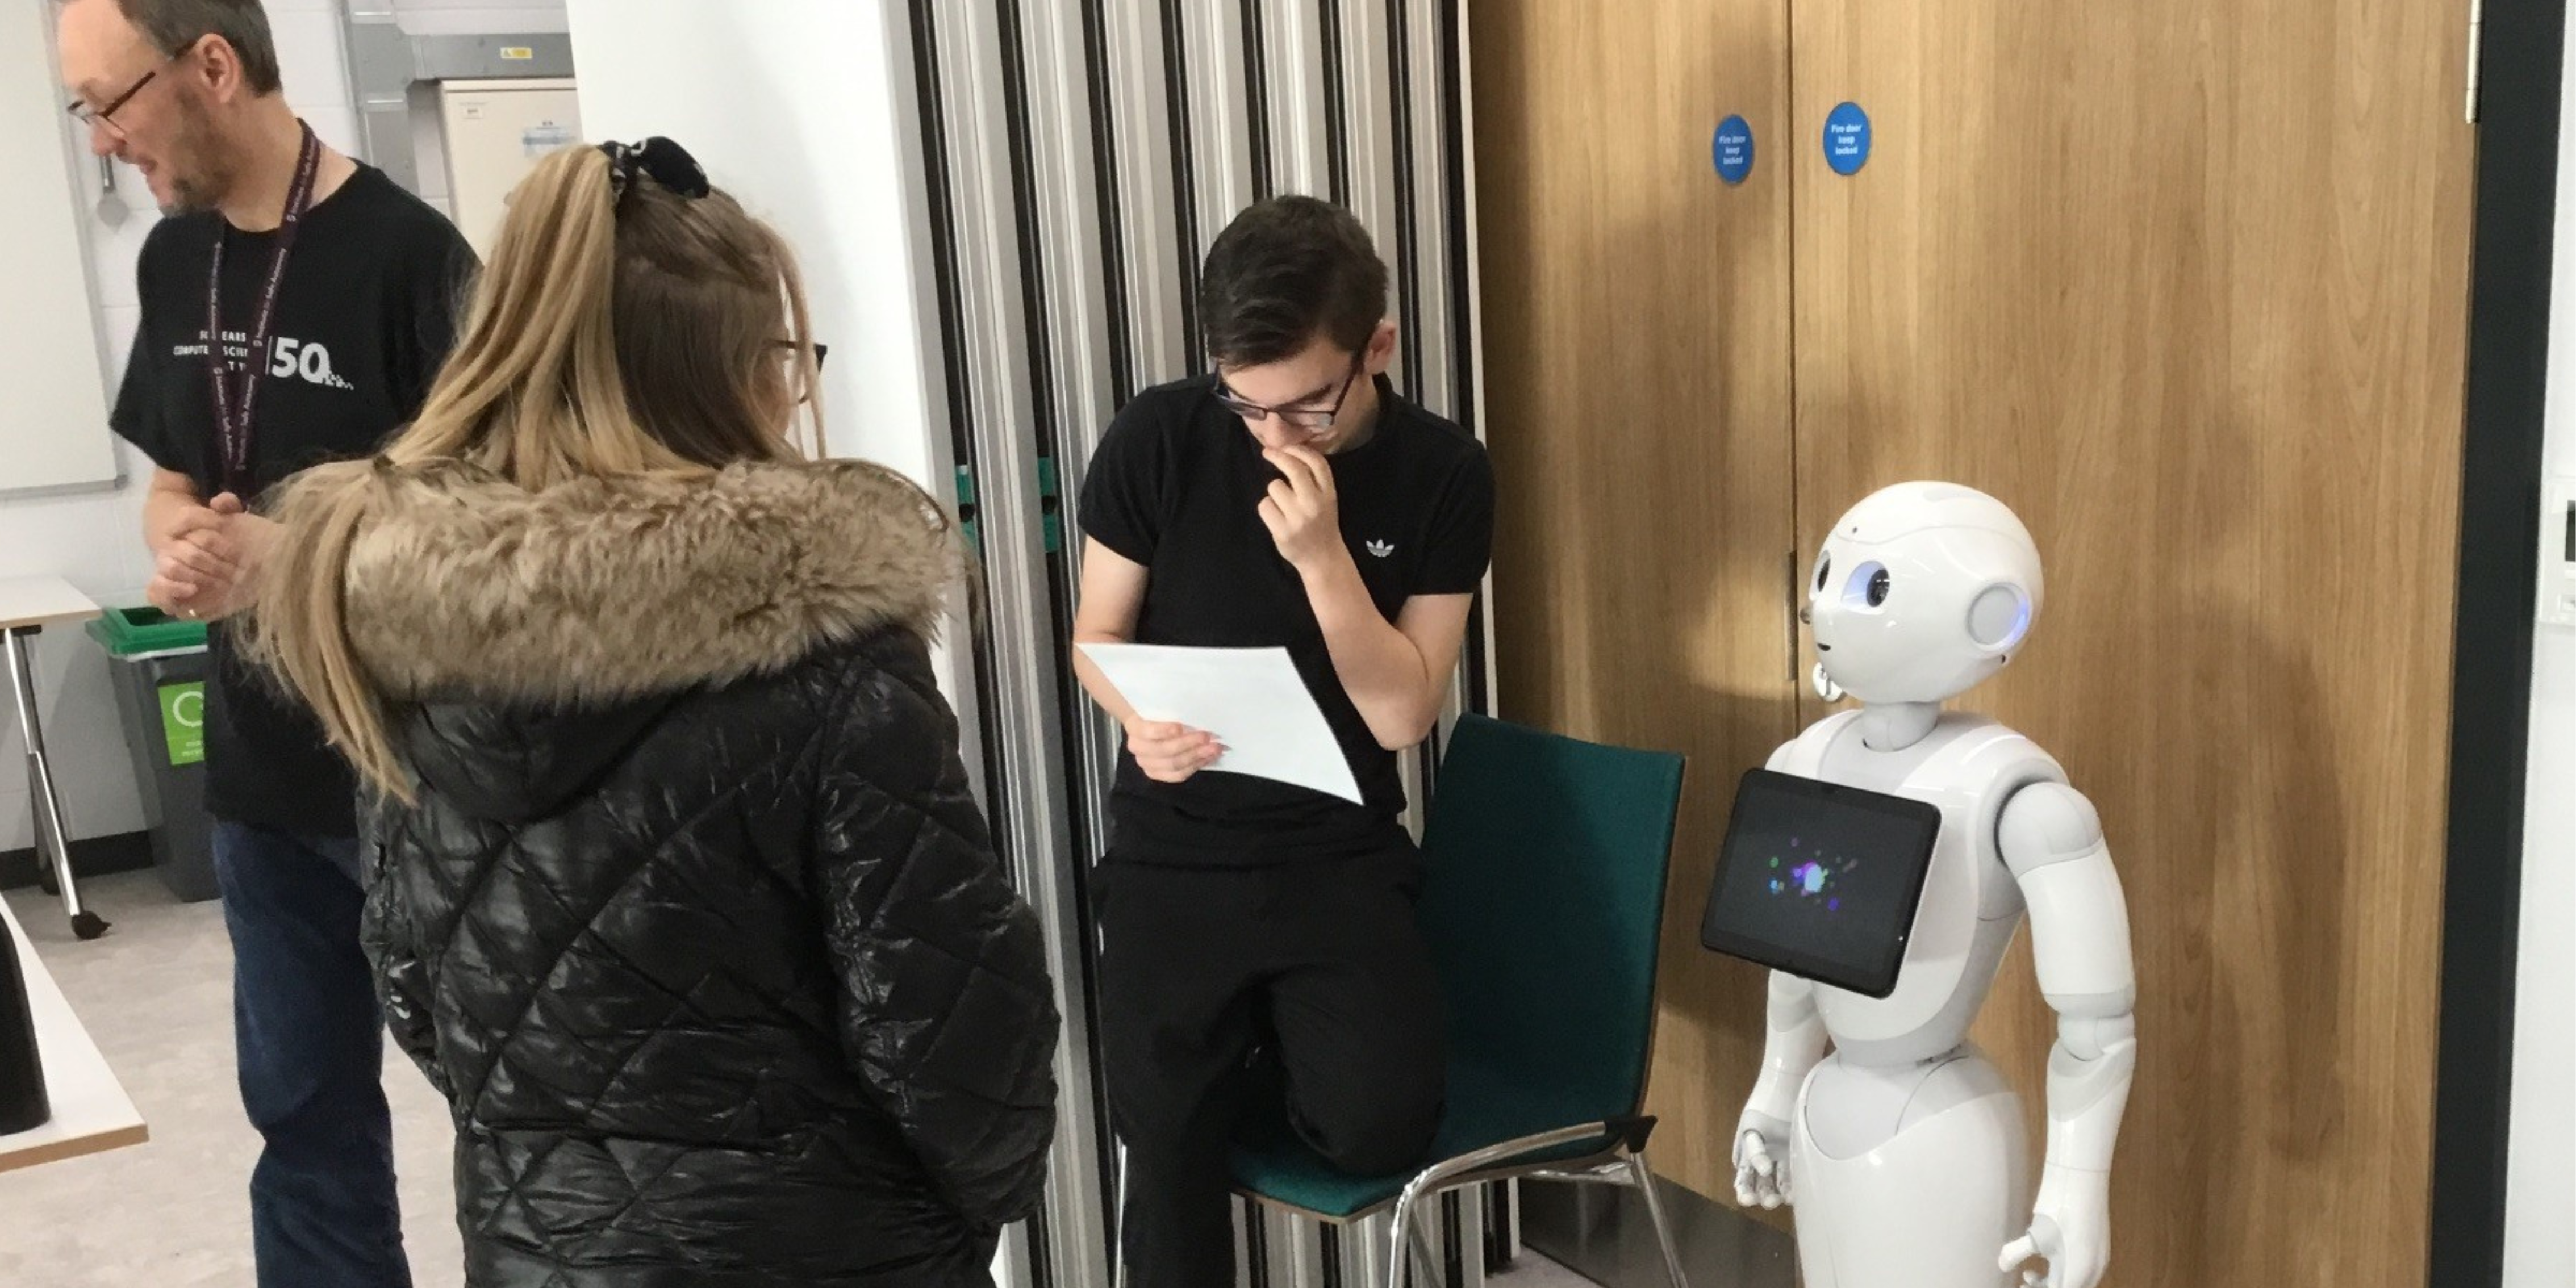 Young people, researchers, and a humanoid robot